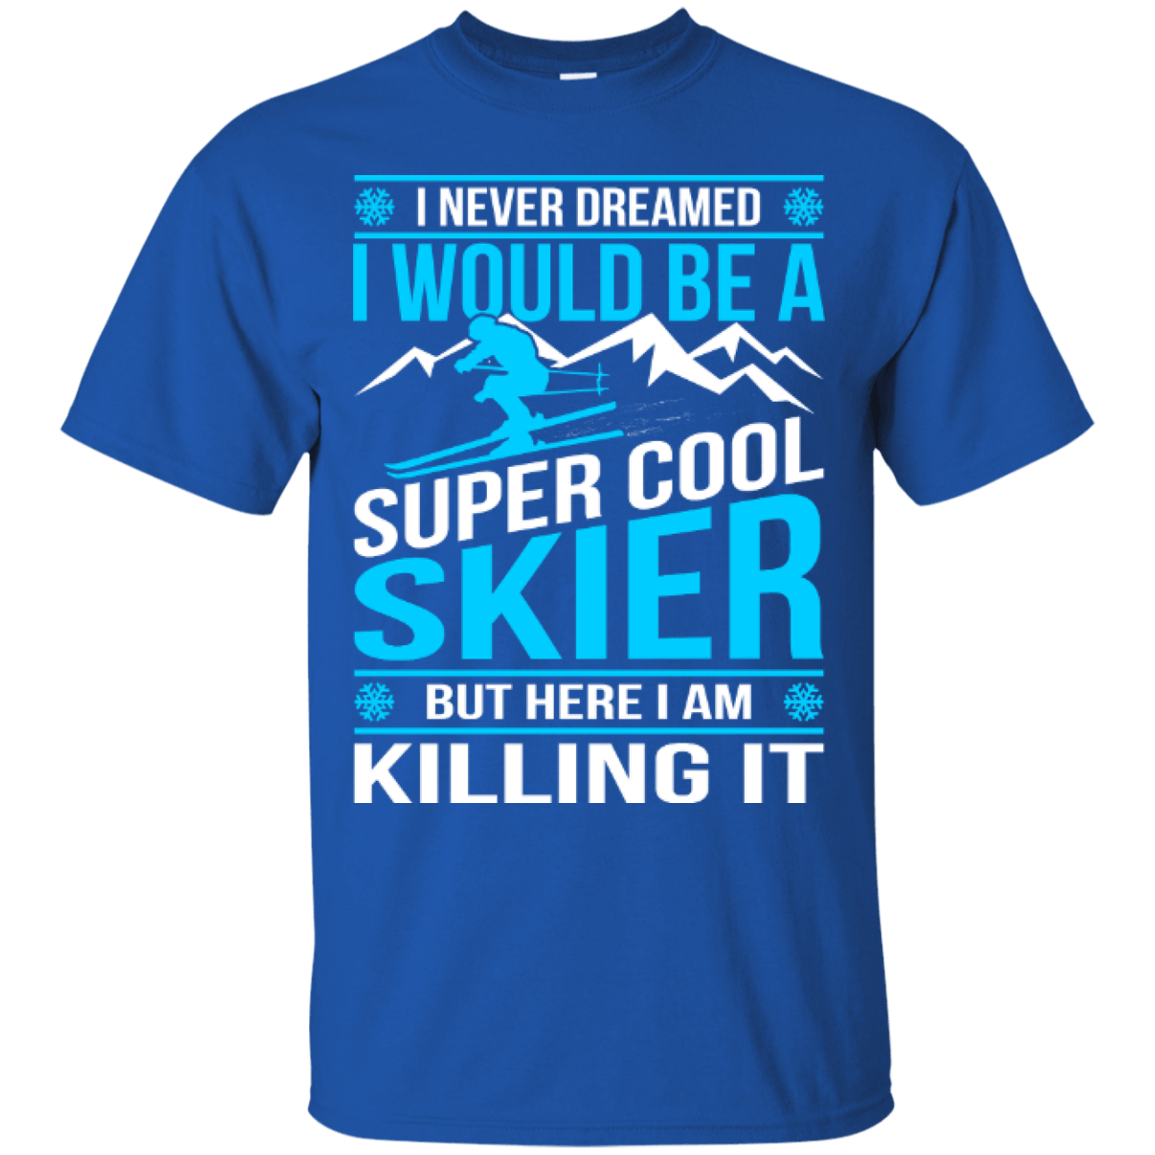 I Never Dreamed I Would Be A Super Cool Skier But Here I Am Killing It Tees - Powderaddicts